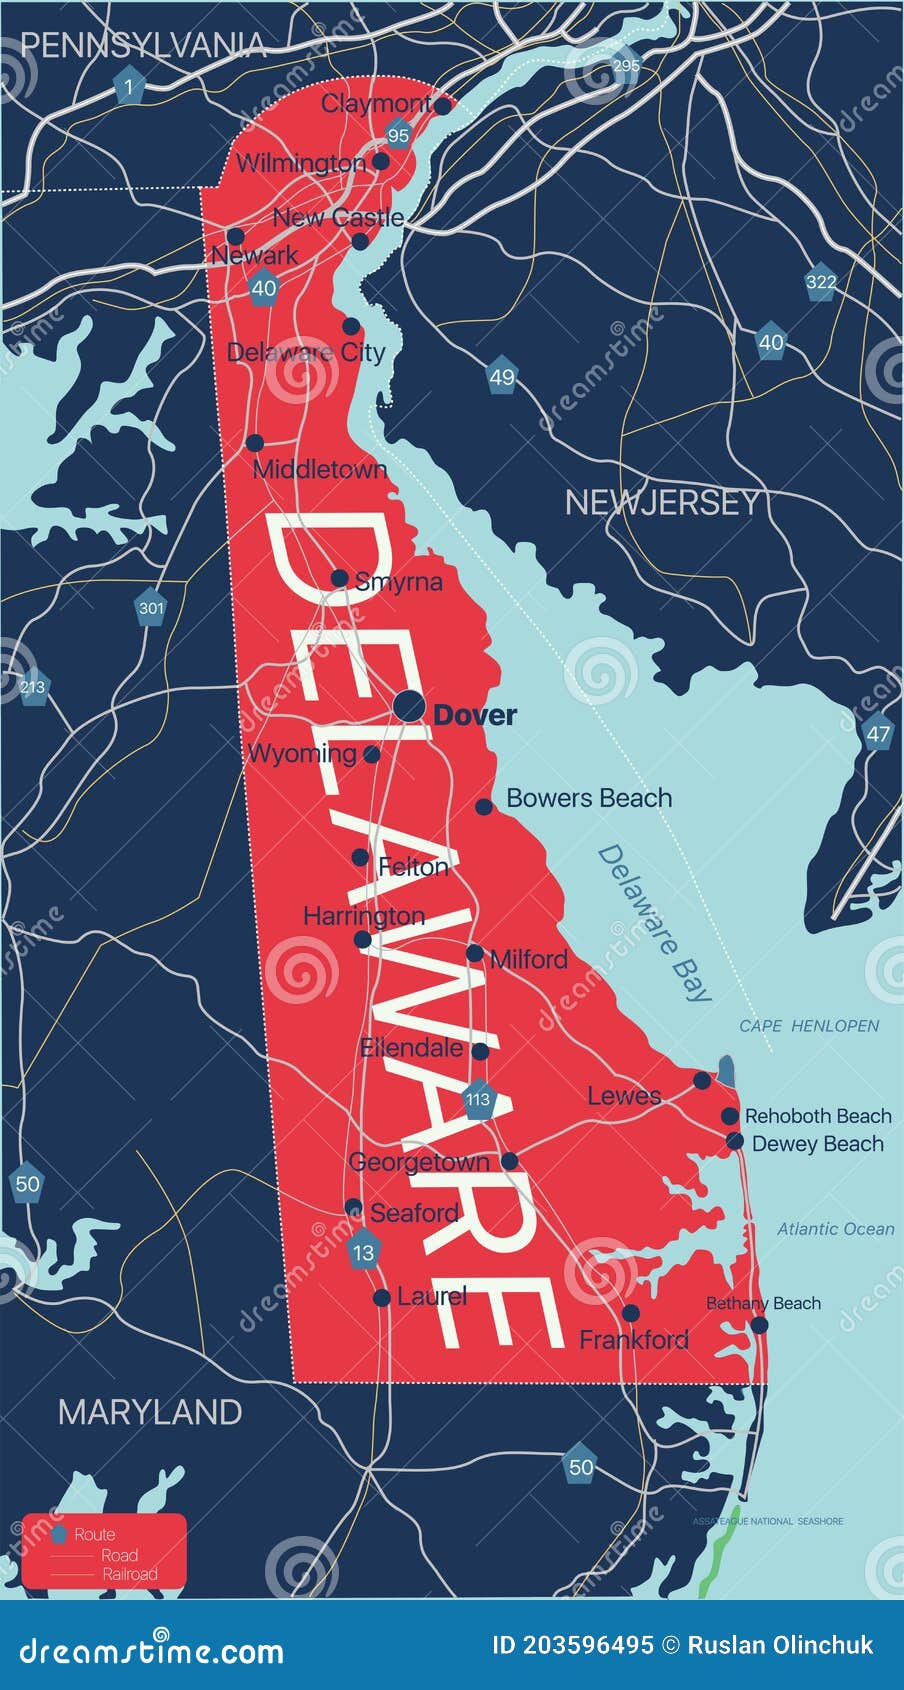 Delaware State Detailed Editable Map Cities Towns Geographic Sites Roads Railways Interstates U S Highways Vector Eps 203596495 